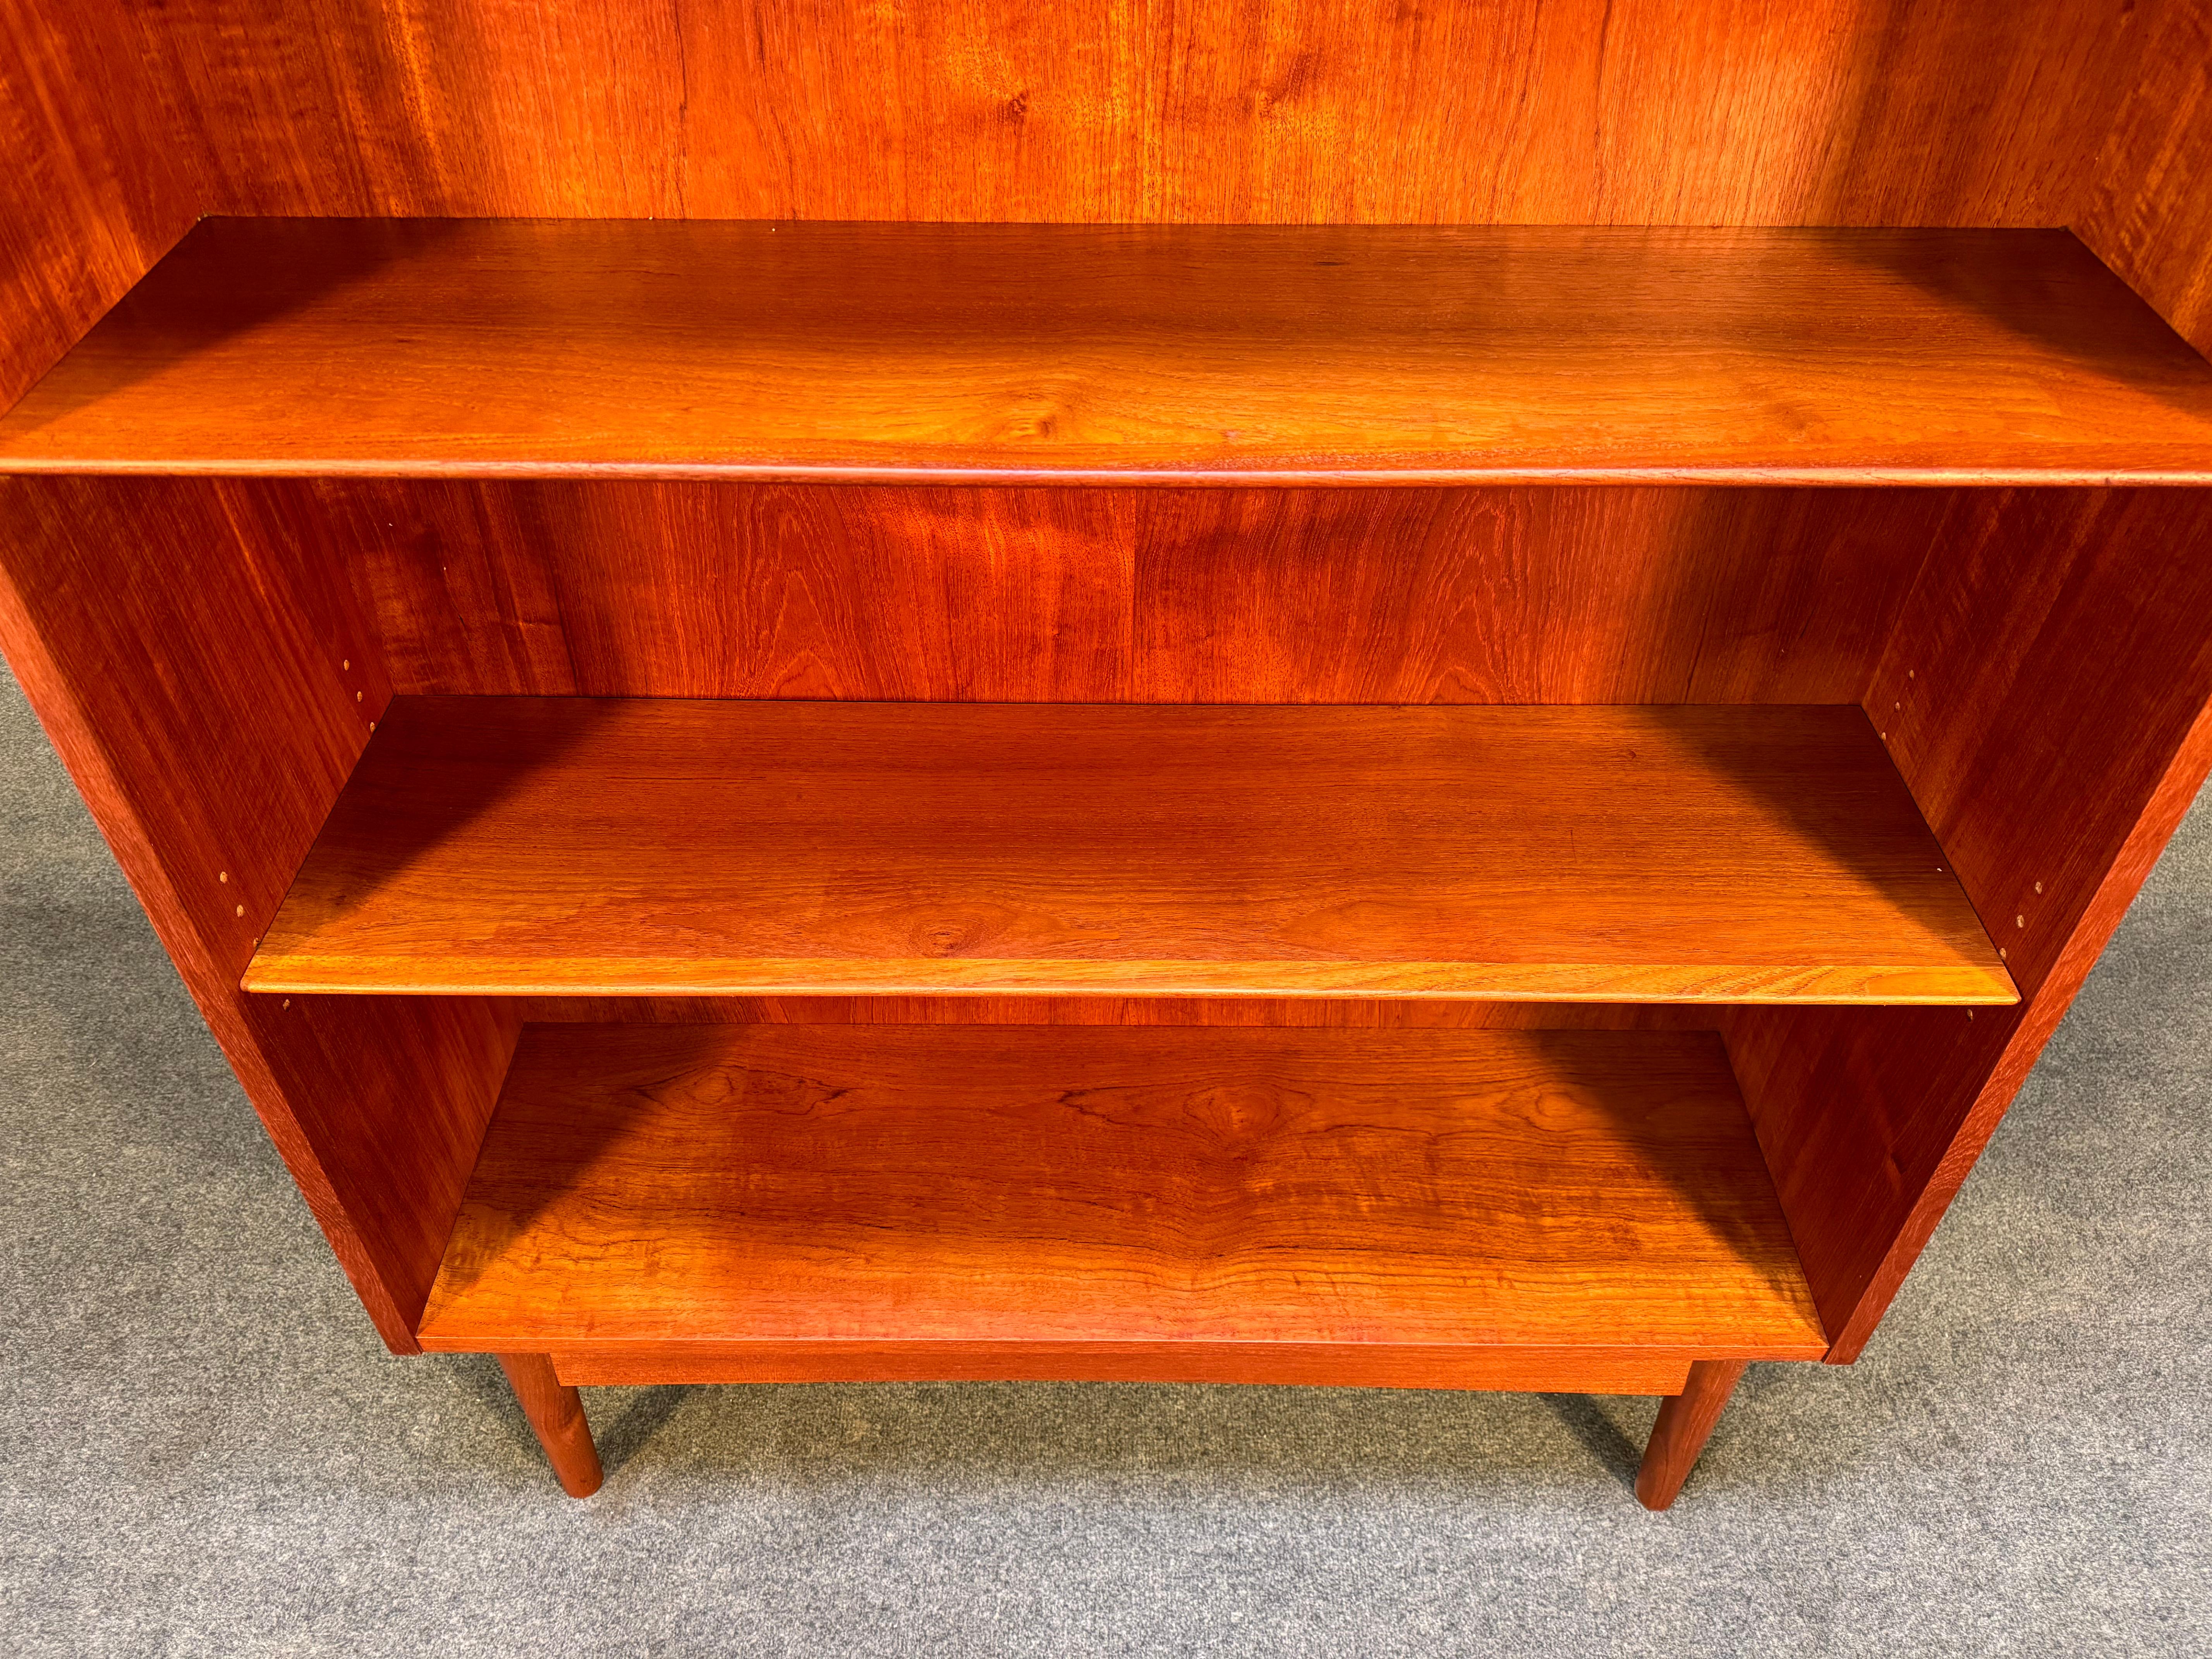 Here is a beautiful scandinavian modern bookcase in teak designed by Johannes Sorth and manufactured by Nexxo Mobelfabrik in Denmark in the 1960's.
This lovely case piece, recently imported from Europe to California before its refinishing, features